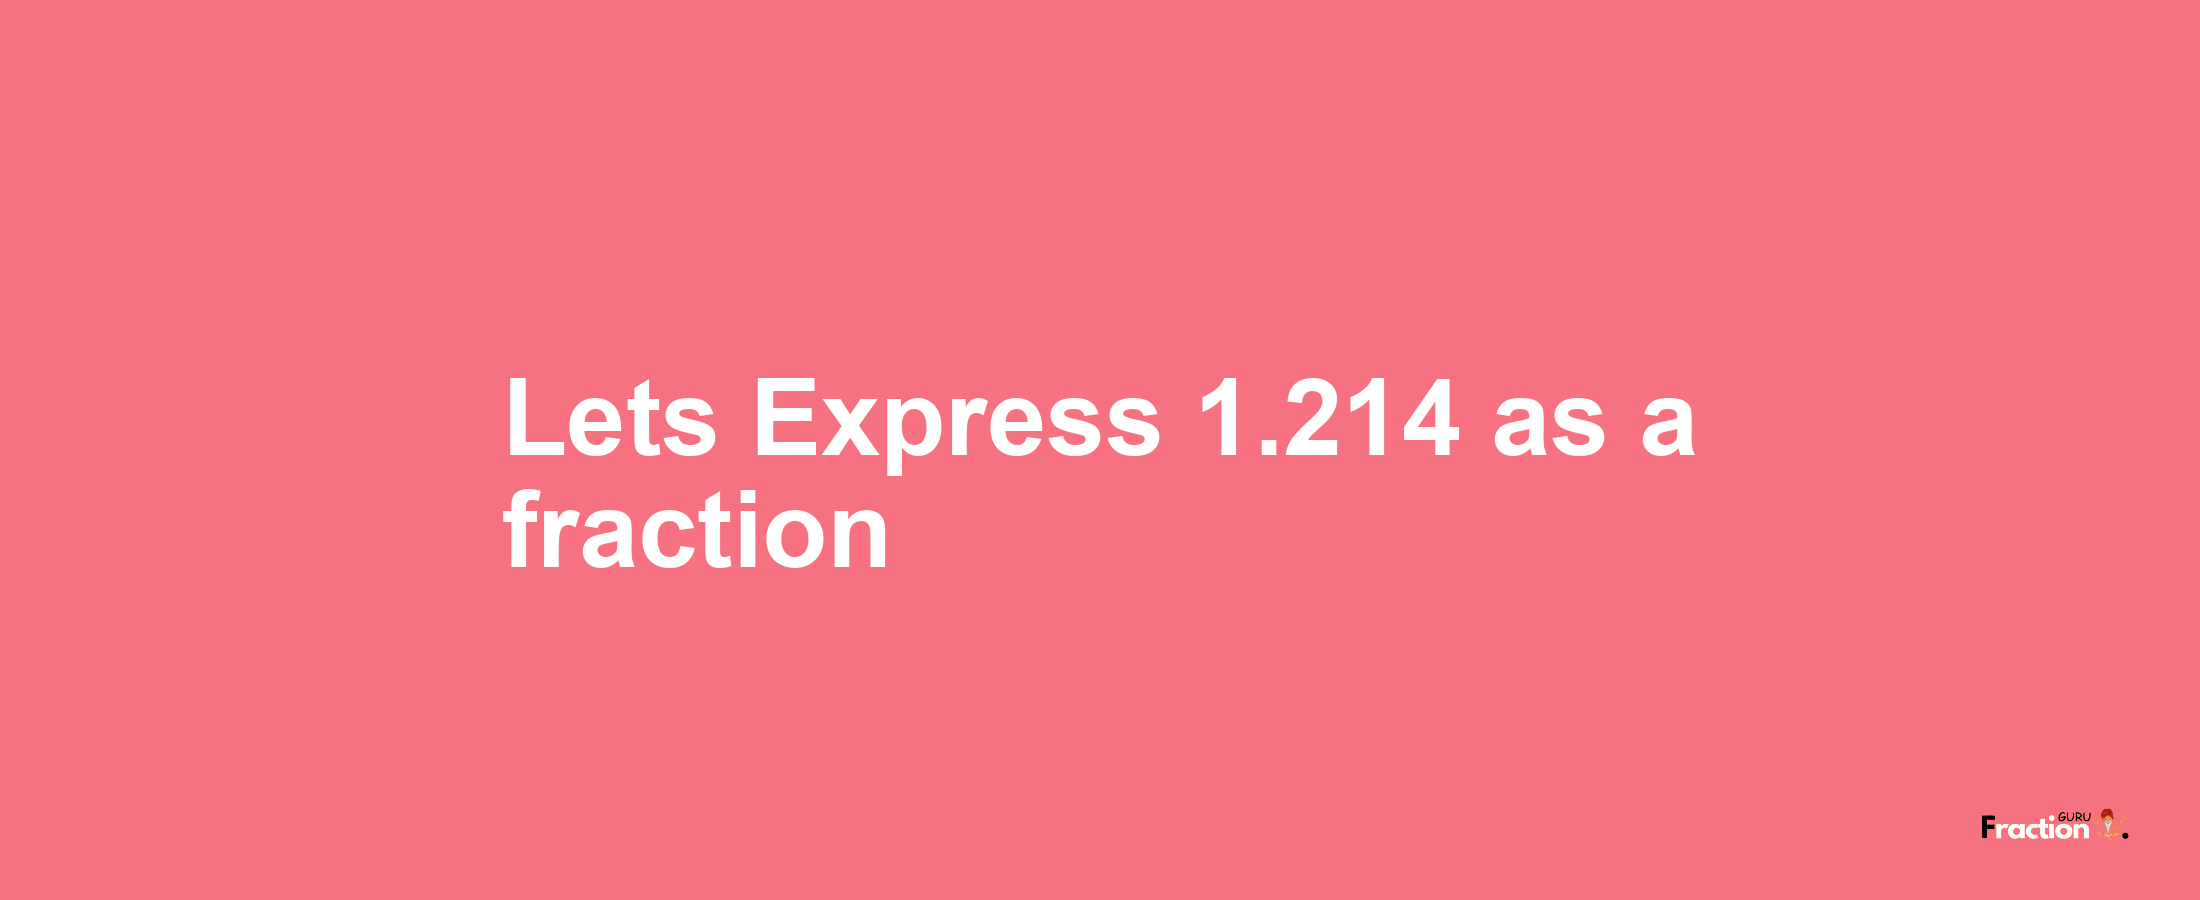 Lets Express 1.214 as afraction